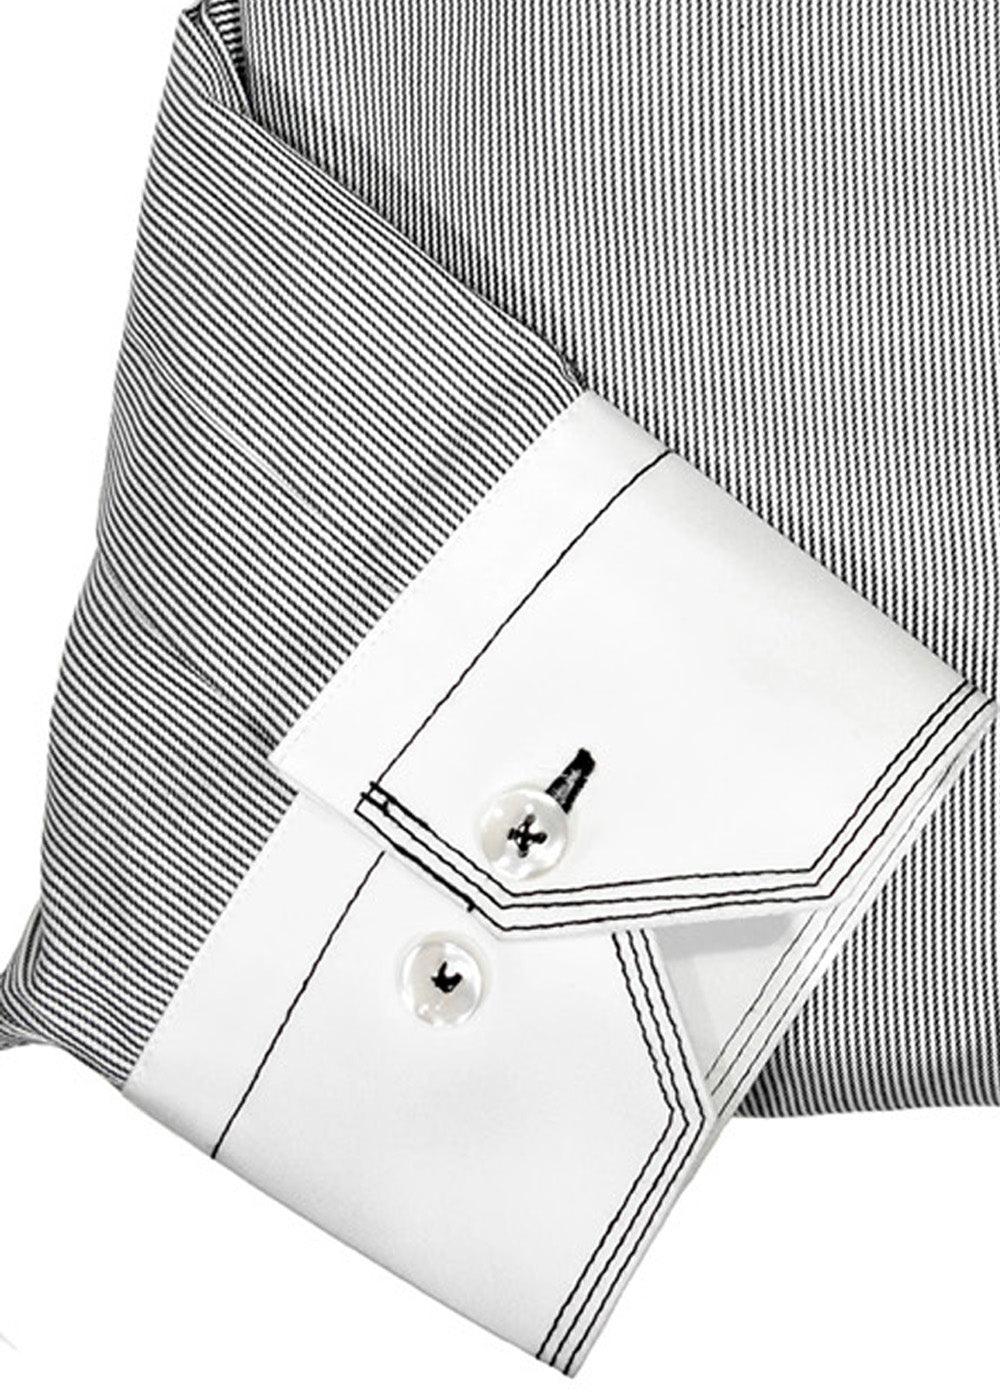 Couple the white collar and white cuff with a fine pencil stripe and contrast triple stitchwork to create an ultra sophisticated sport shirt. Soft exclusive cotton fabric, medium collar and classic shaped fit.